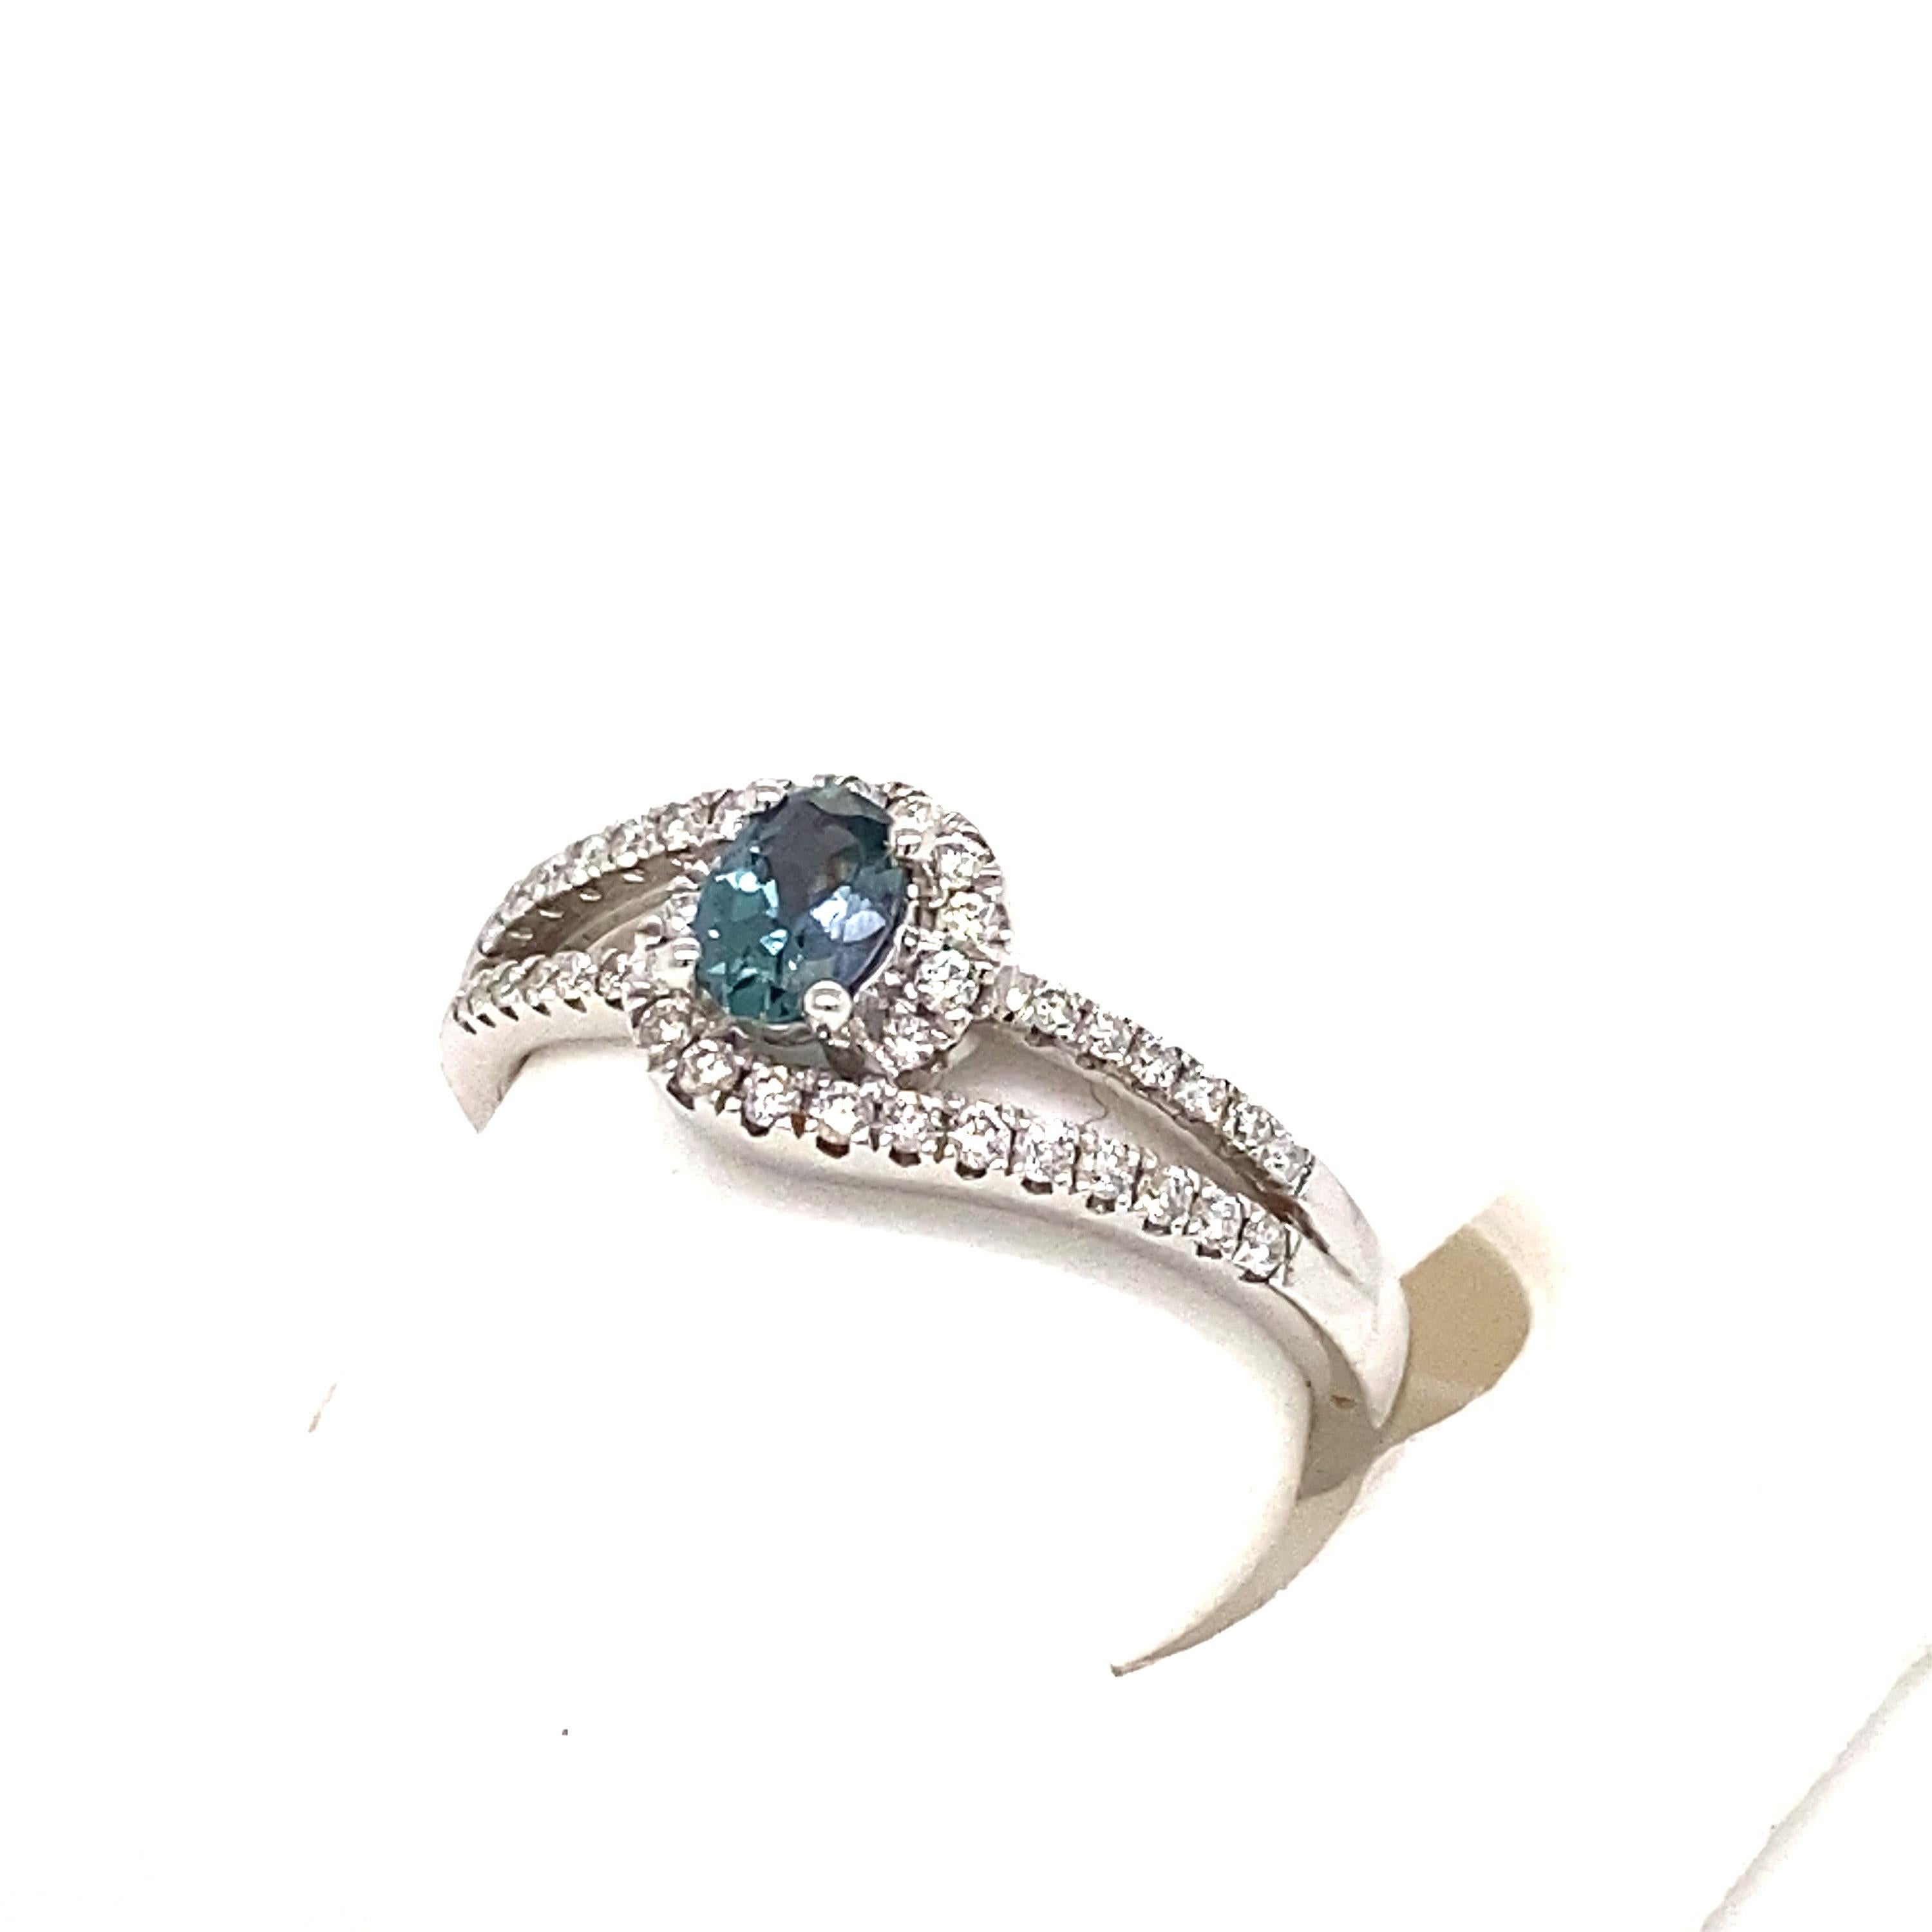 This is a gorgeous natural AAA quality oval Alexandrite surrounded by dainty diamonds that are set in a vintage white gold setting. This ring features a natural 0.40 carat oval alexandrite that is certified by the Gemological Institute of America